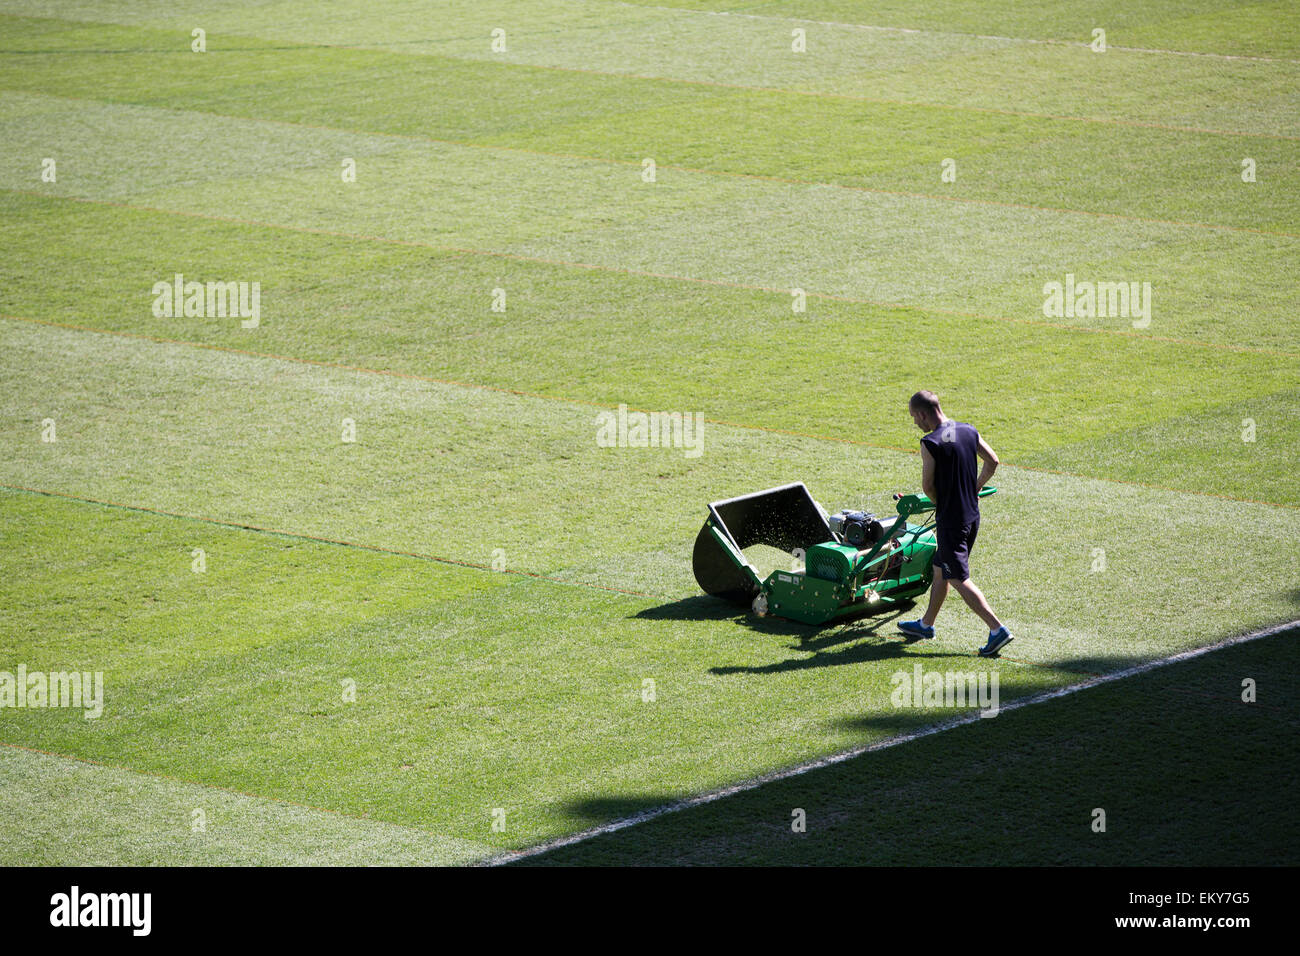 Groundsman cutting the grass in football stadium with traditional mower Stock Photo